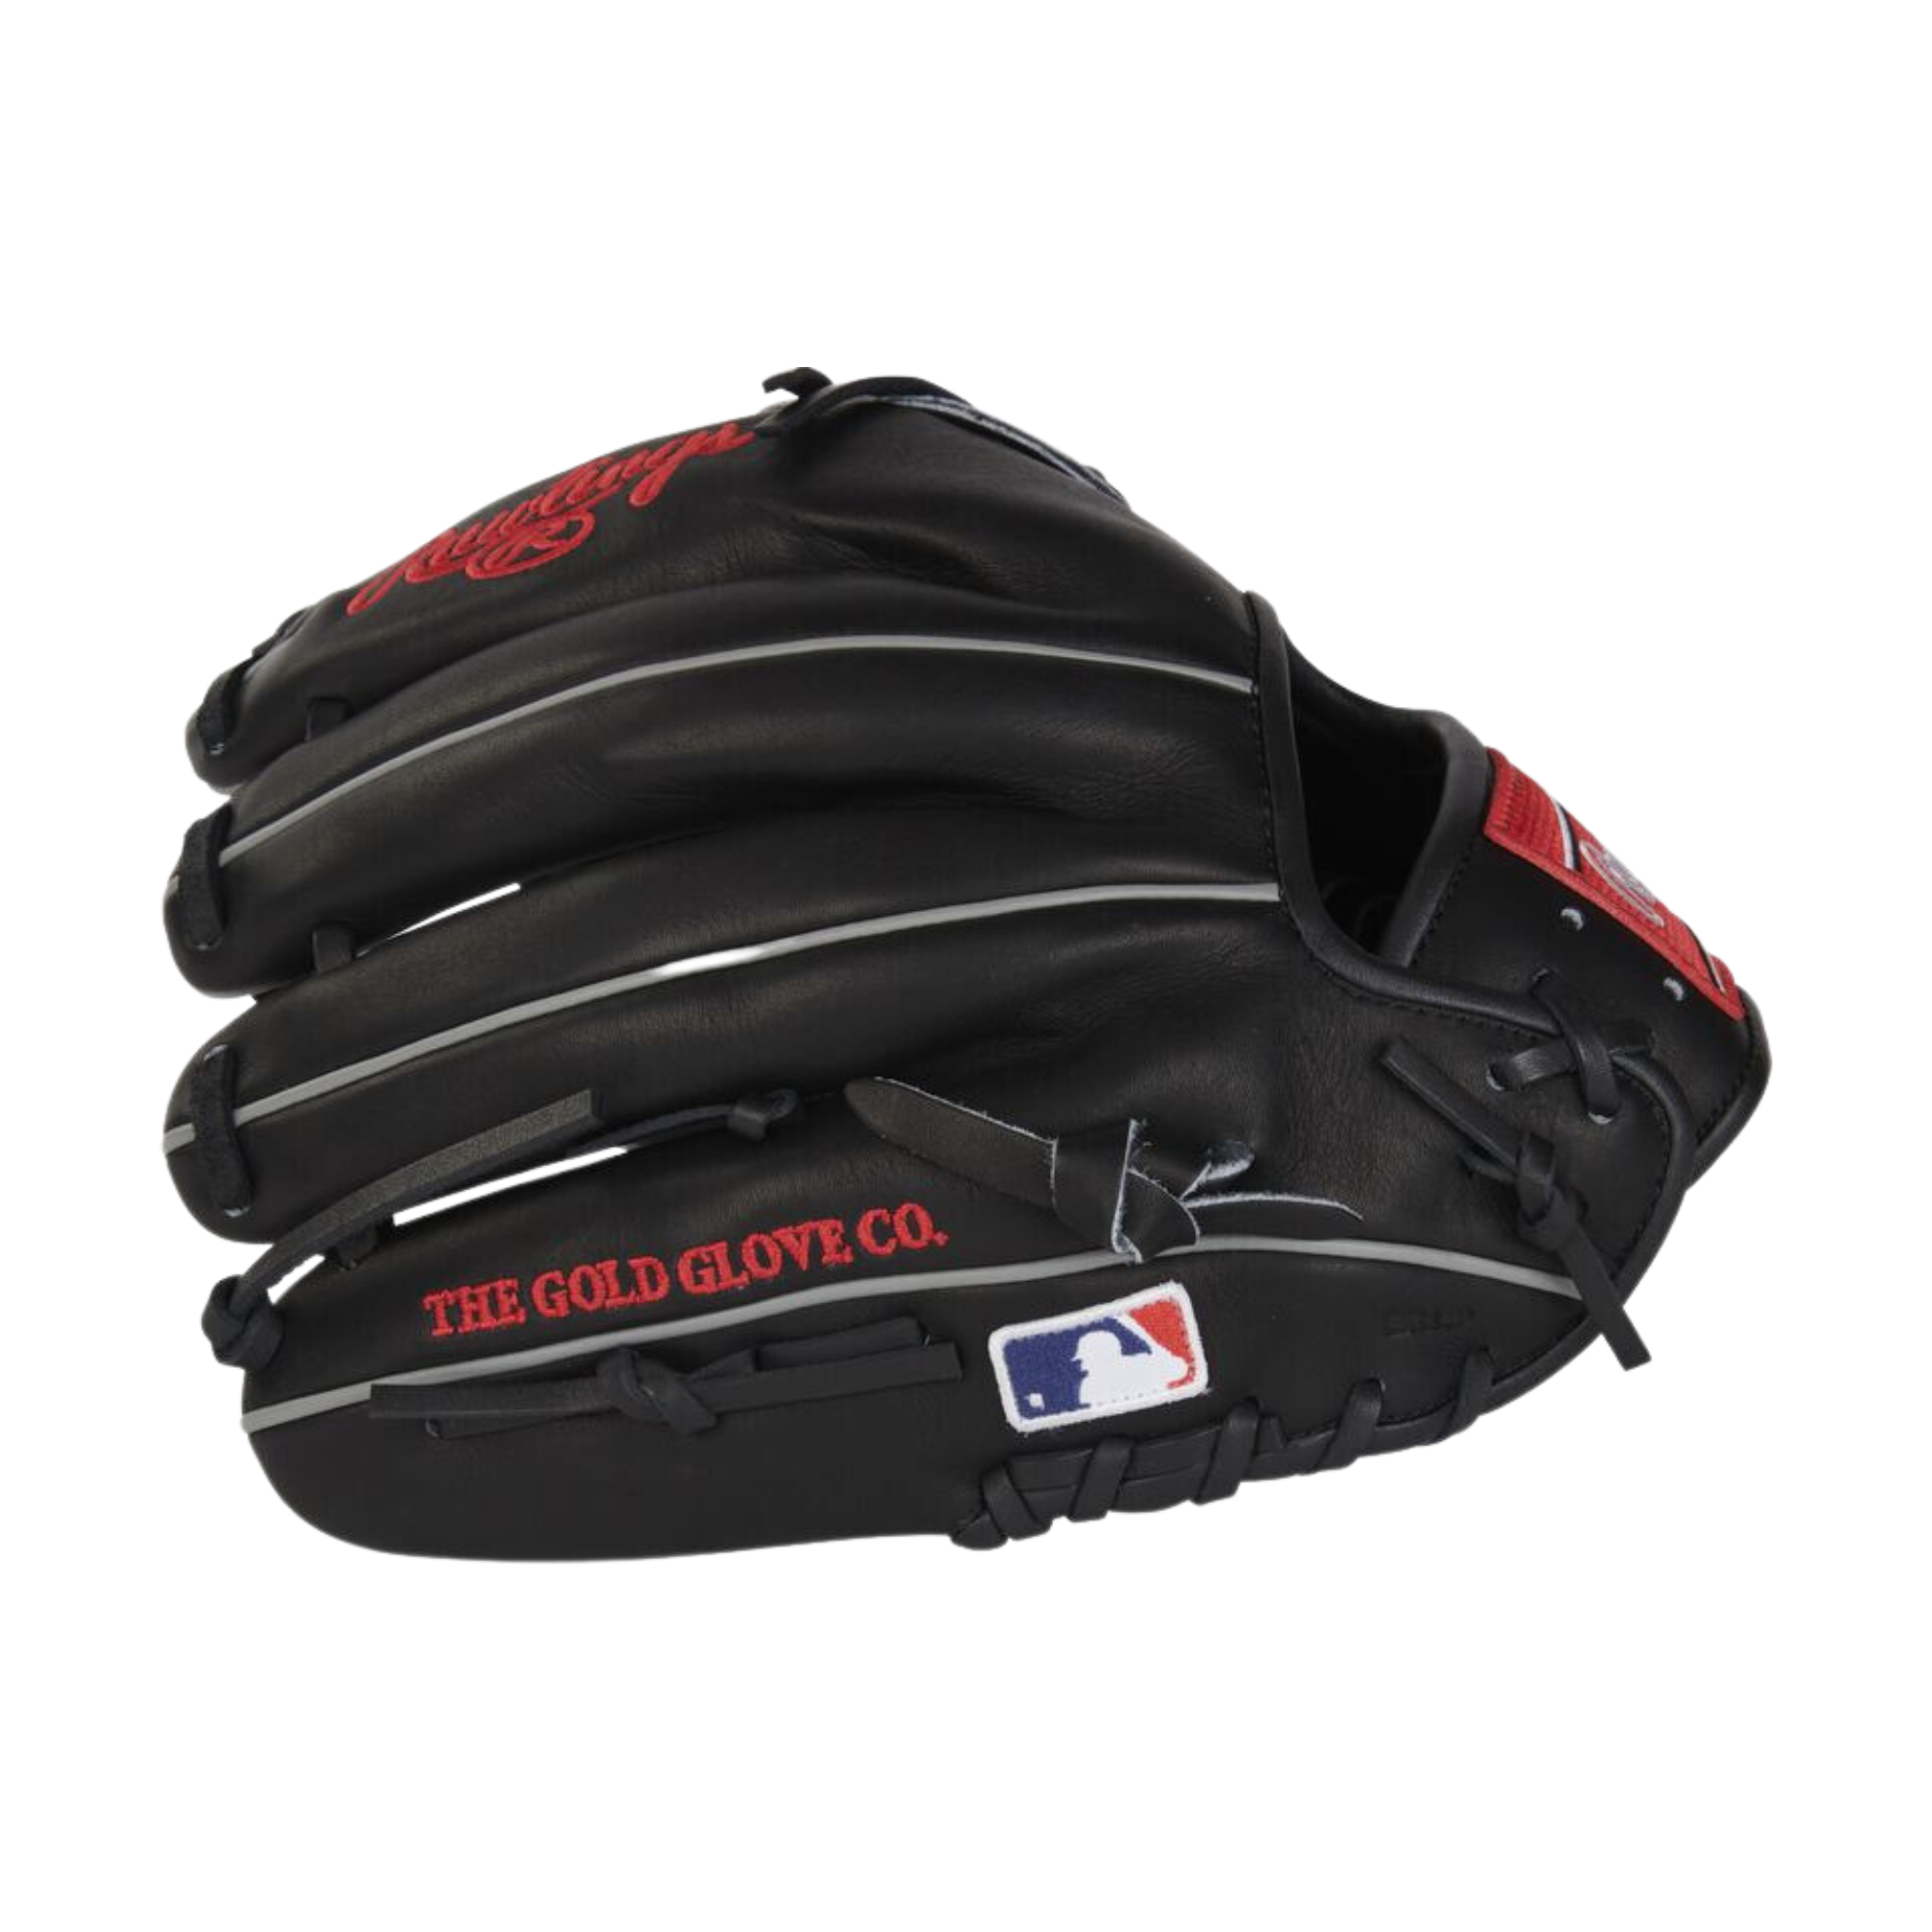 Rawlings Heart Of The Hide Traditional Series Baseball Glove 12" LHT